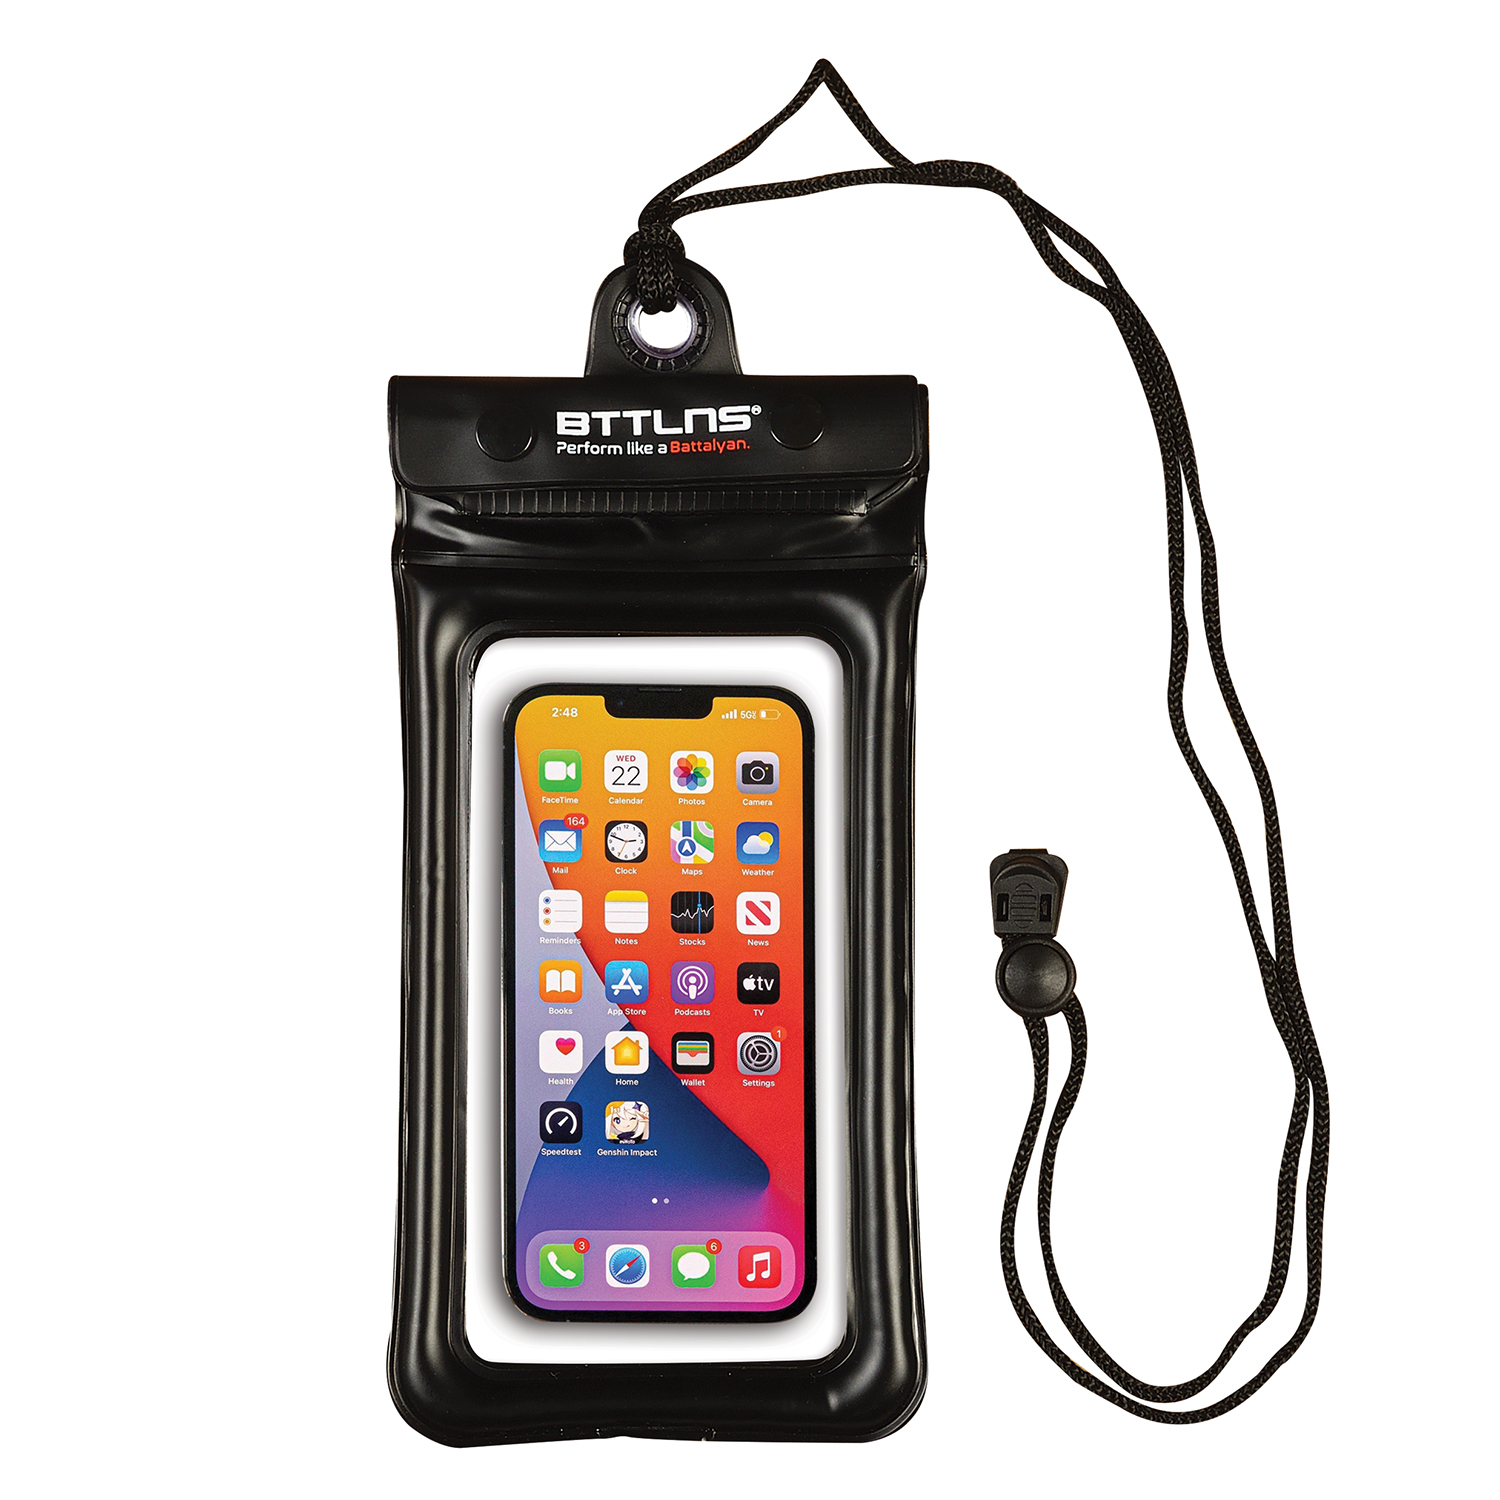 BTTLNS floating waterproof phone pouch Endymion 1.0 black  0317013-010